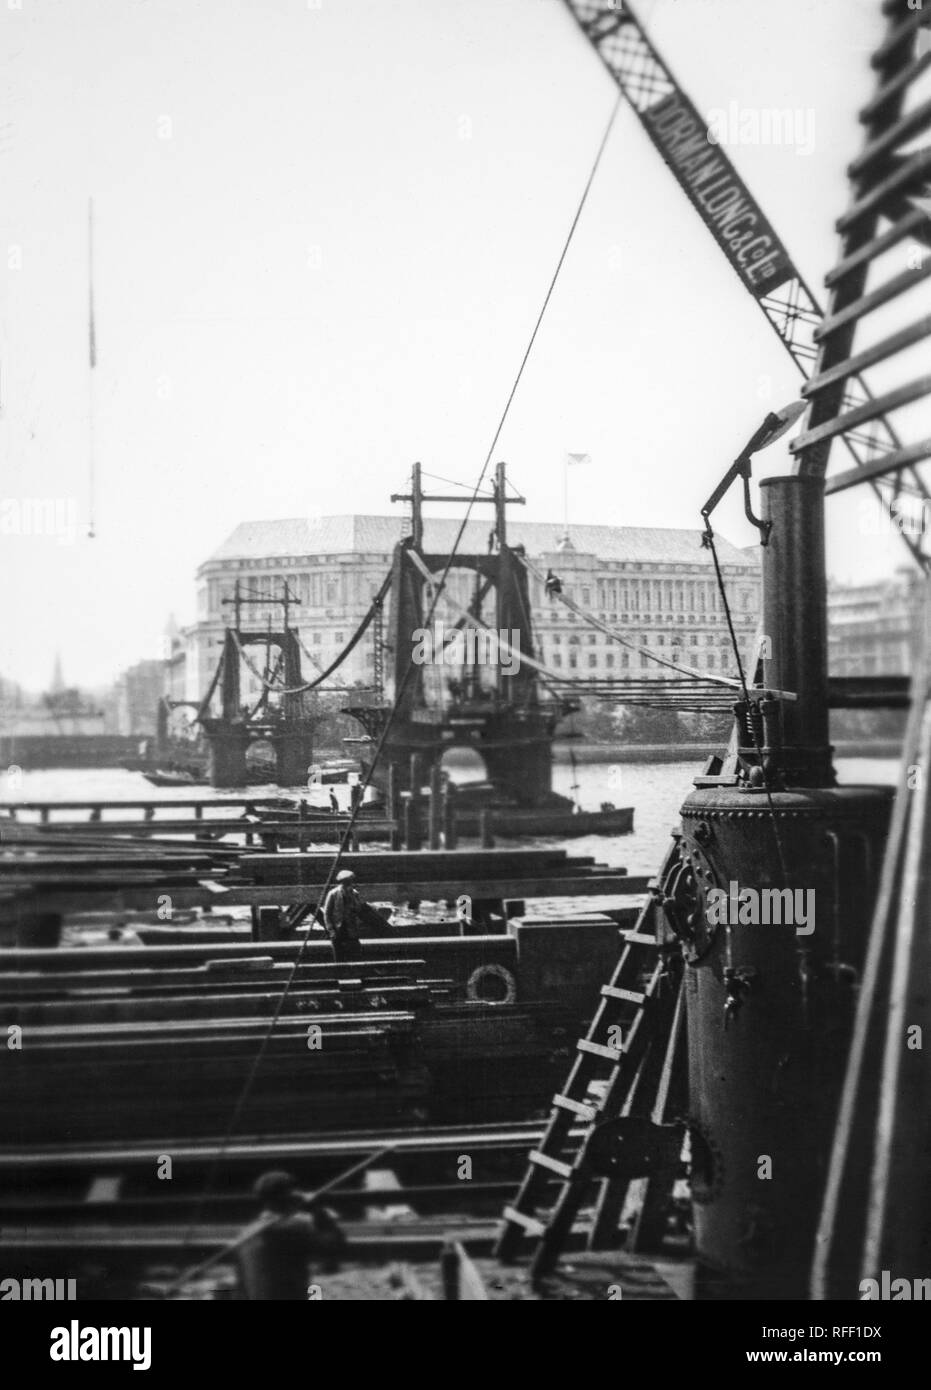 The dismantling of the original Lambeth Bridge, over the River Thames, in London, England.This was modern bridge was a suspension bridge, 828 feet (252.4 m) long, designed by Peter W. Barlow. Sanctioned by an Act of Parliament in 1860, it opened as a toll bridge on 10 November 1862. Doubts about its safety, coupled with its awkwardly steep approaches deterring horse-drawn traffic, meant it soon became used almost solely as a pedestrian crossing. It ceased to be a toll bridge in 1879,  it was by then severely corroded, and was closed in 1910. Stock Photo